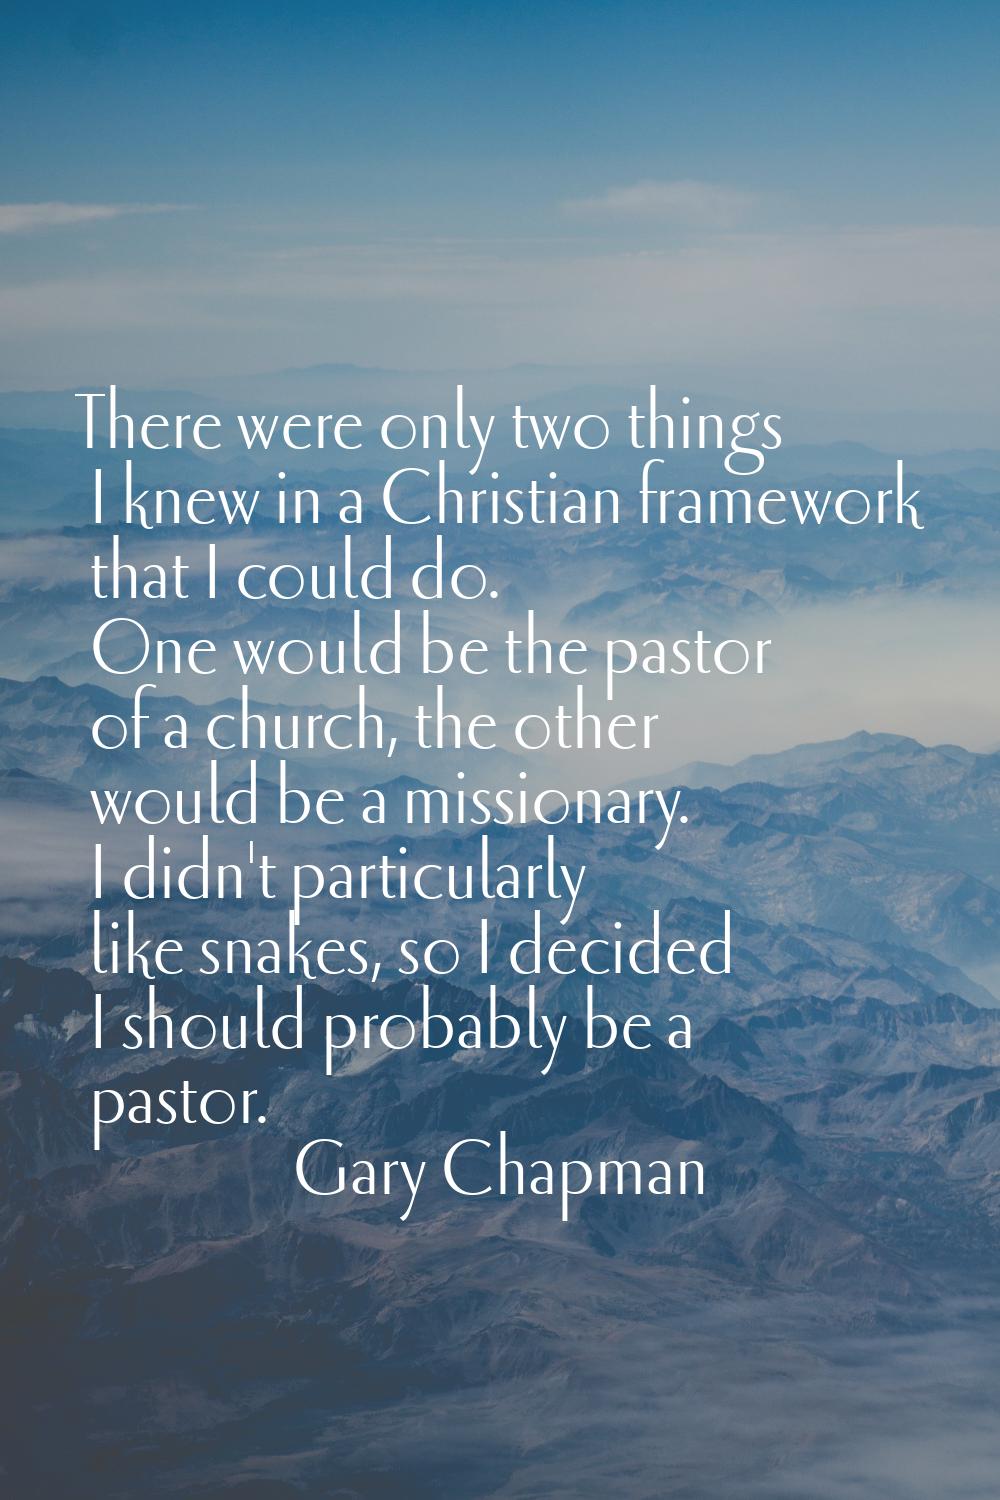 There were only two things I knew in a Christian framework that I could do. One would be the pastor